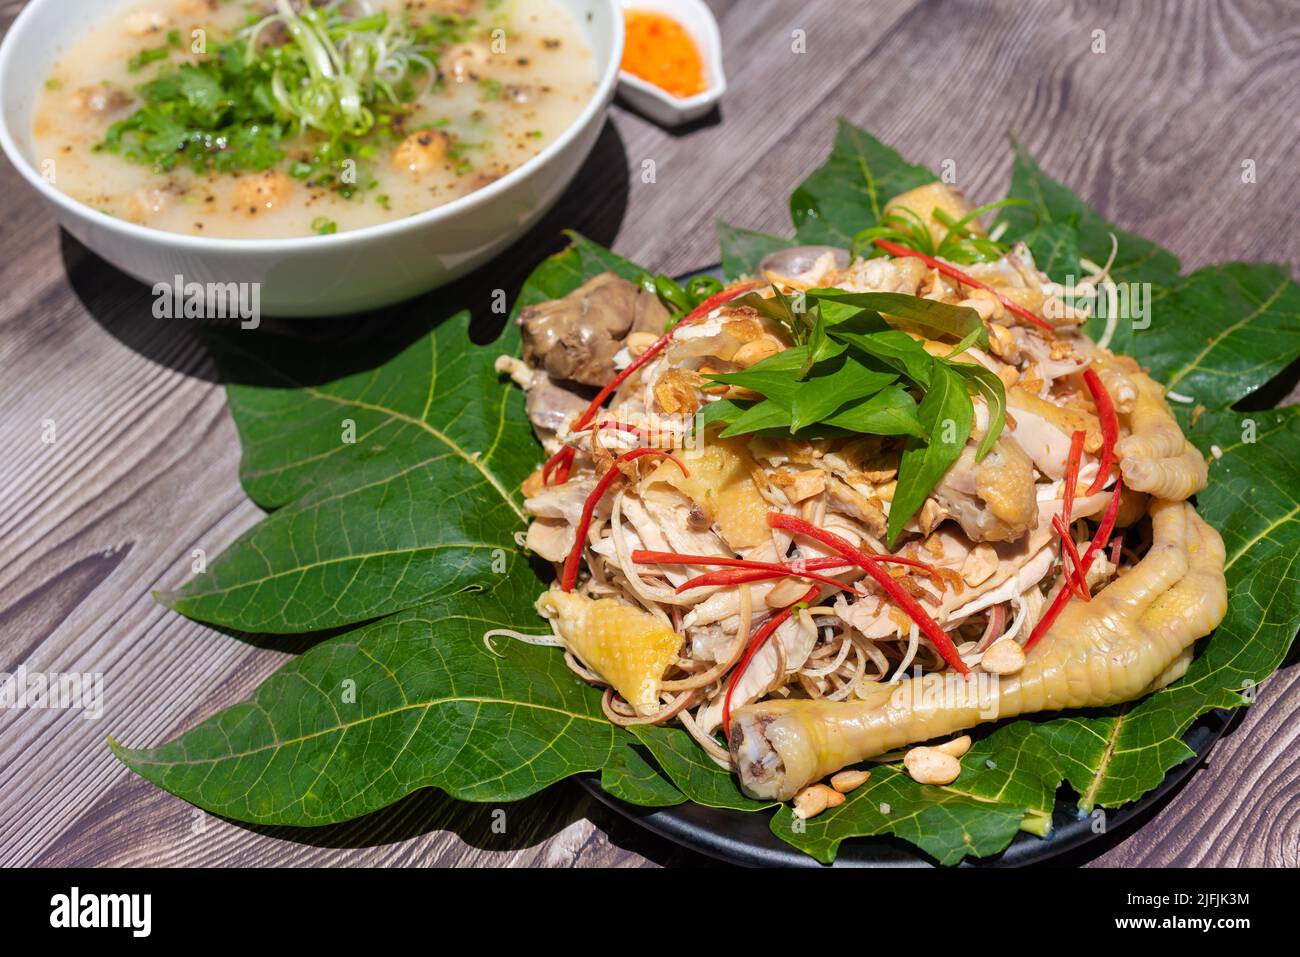 Chicken porridge is cooked from lightly roasted rice, then the rice is really soft. Porridge ingredients include rice, shiitake mushrooms, vegetables Stock Photo